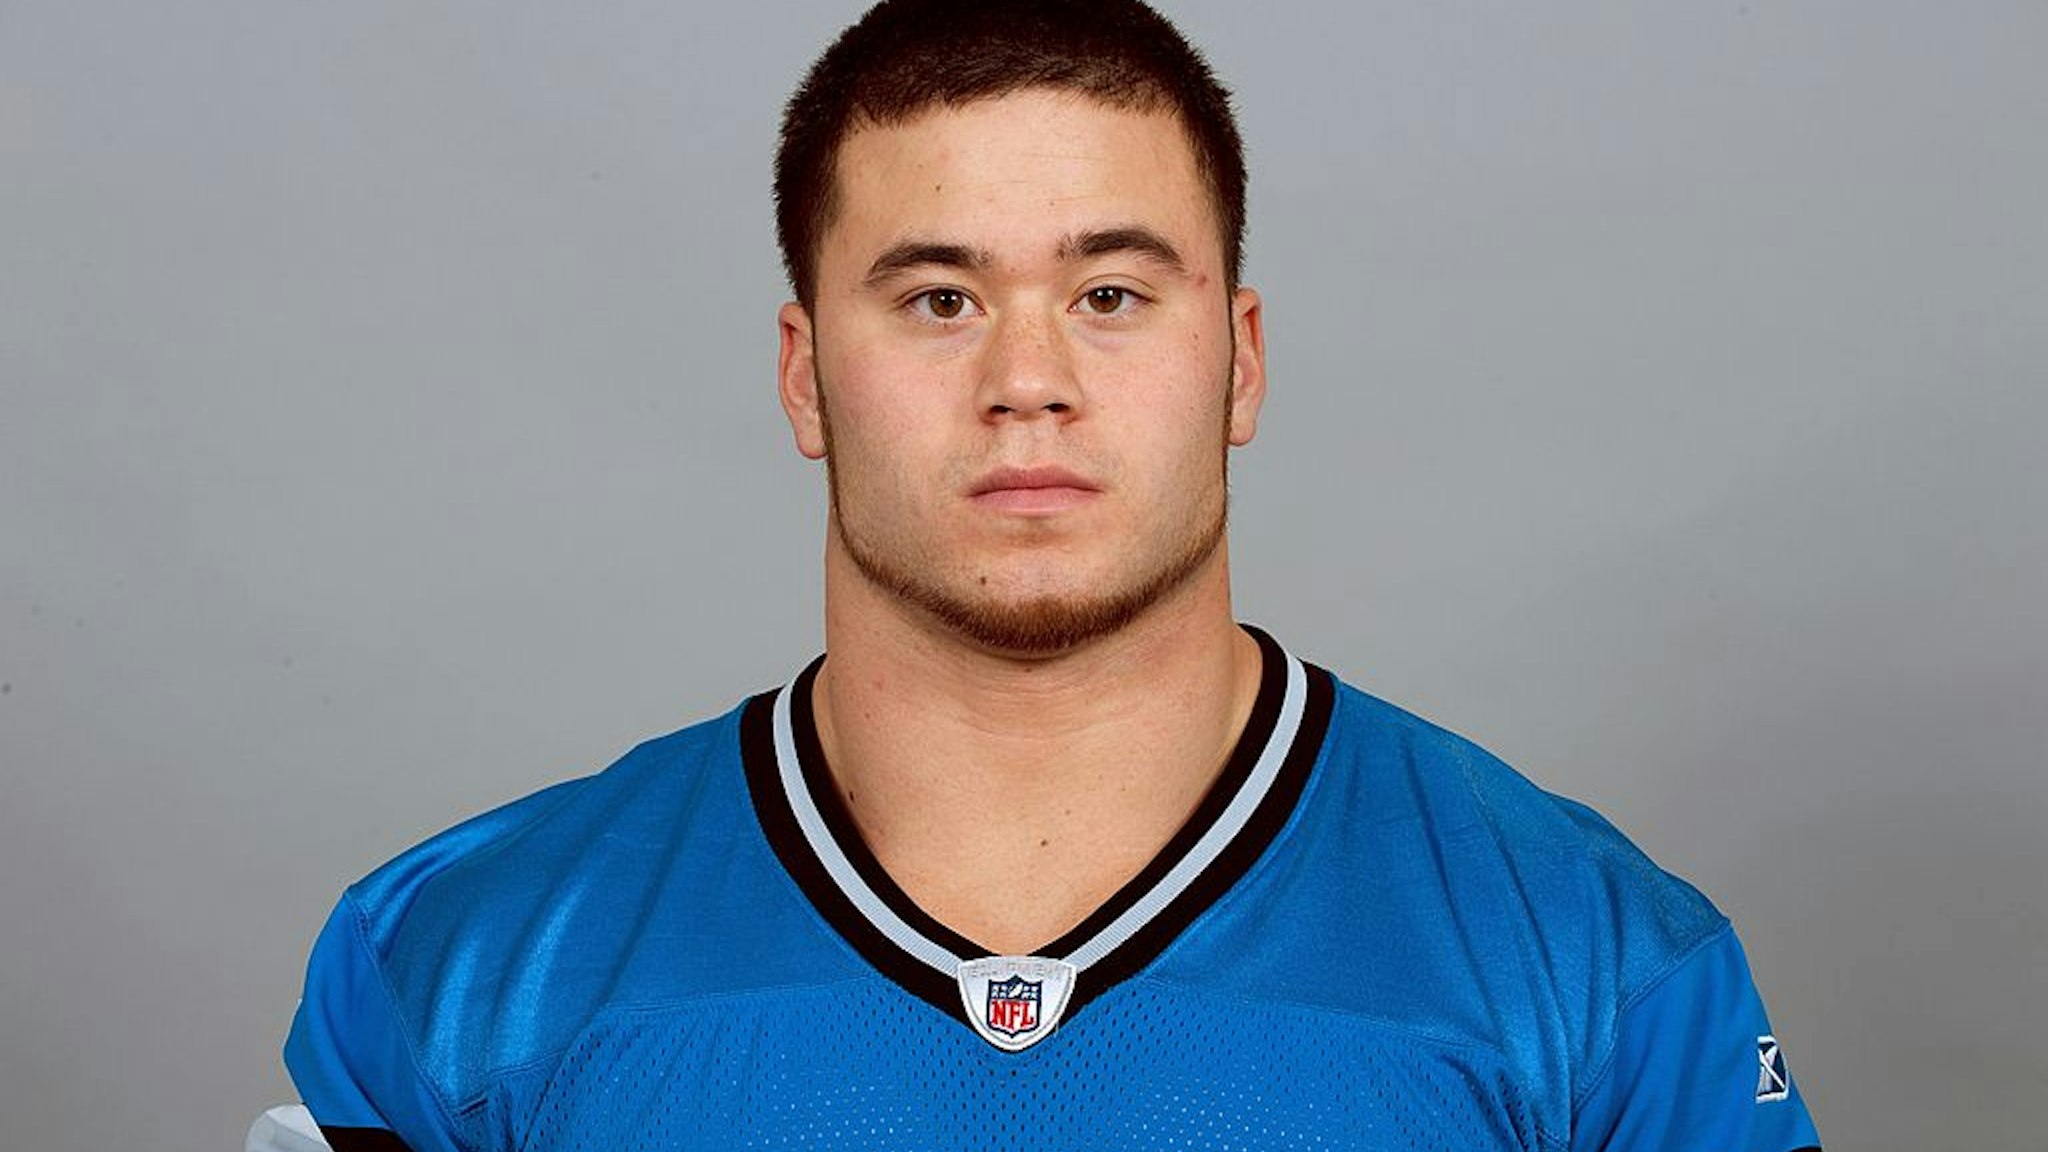 2009: Daniel Holtzclaw of the Detroit Lions poses for his 2009 NFL headshot at photo day in Detroit, Michigan.